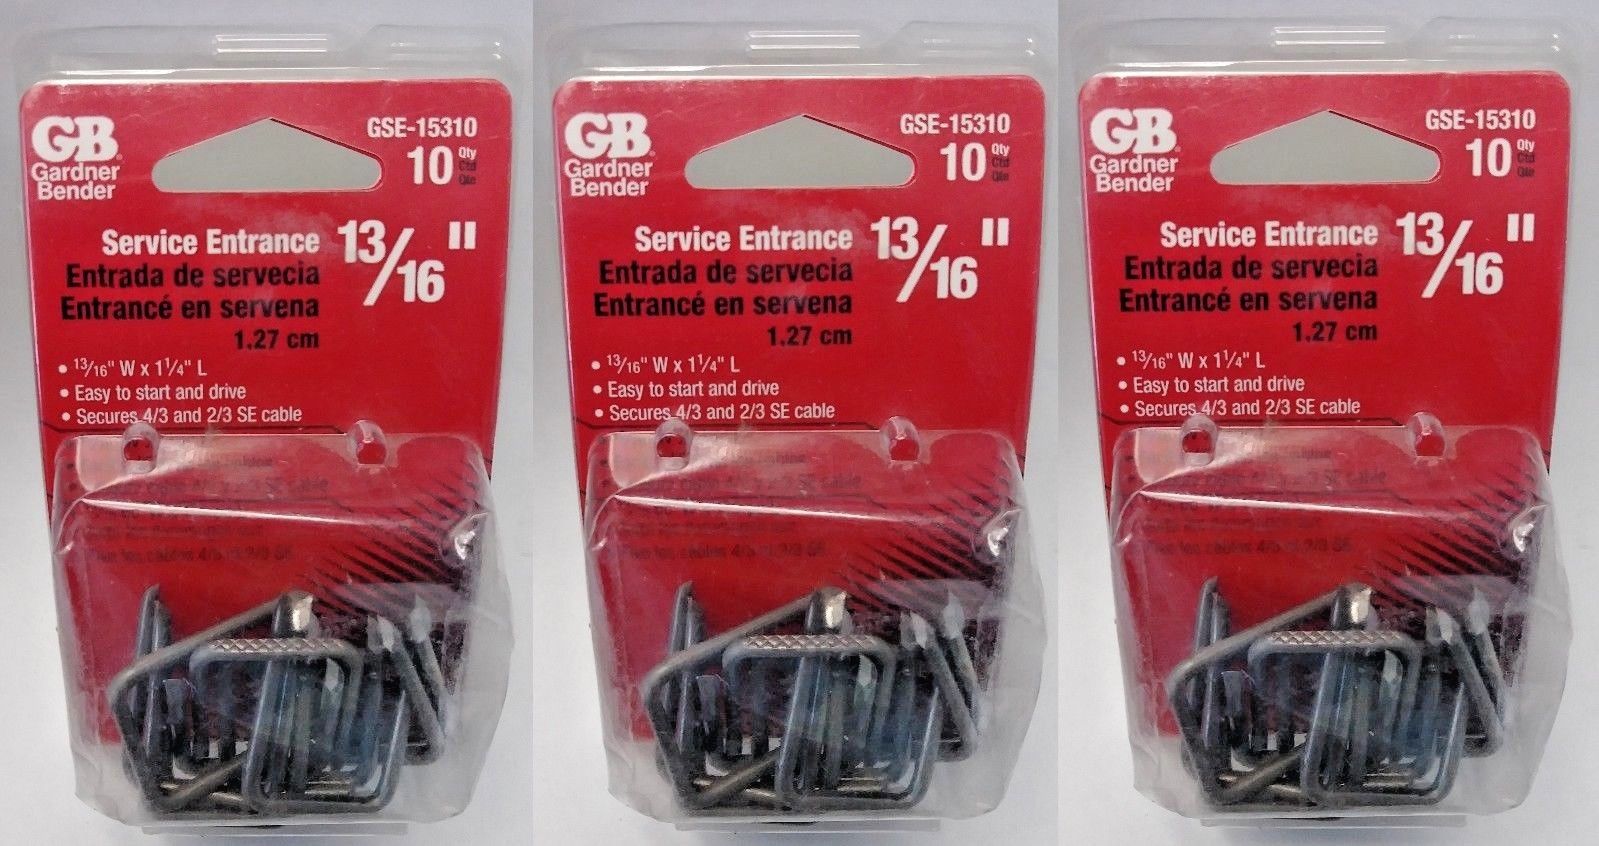 GB GSE-15310 13/16" x 1-1/4" Service Entrance Cable Staples (3 Packs of 10) USA